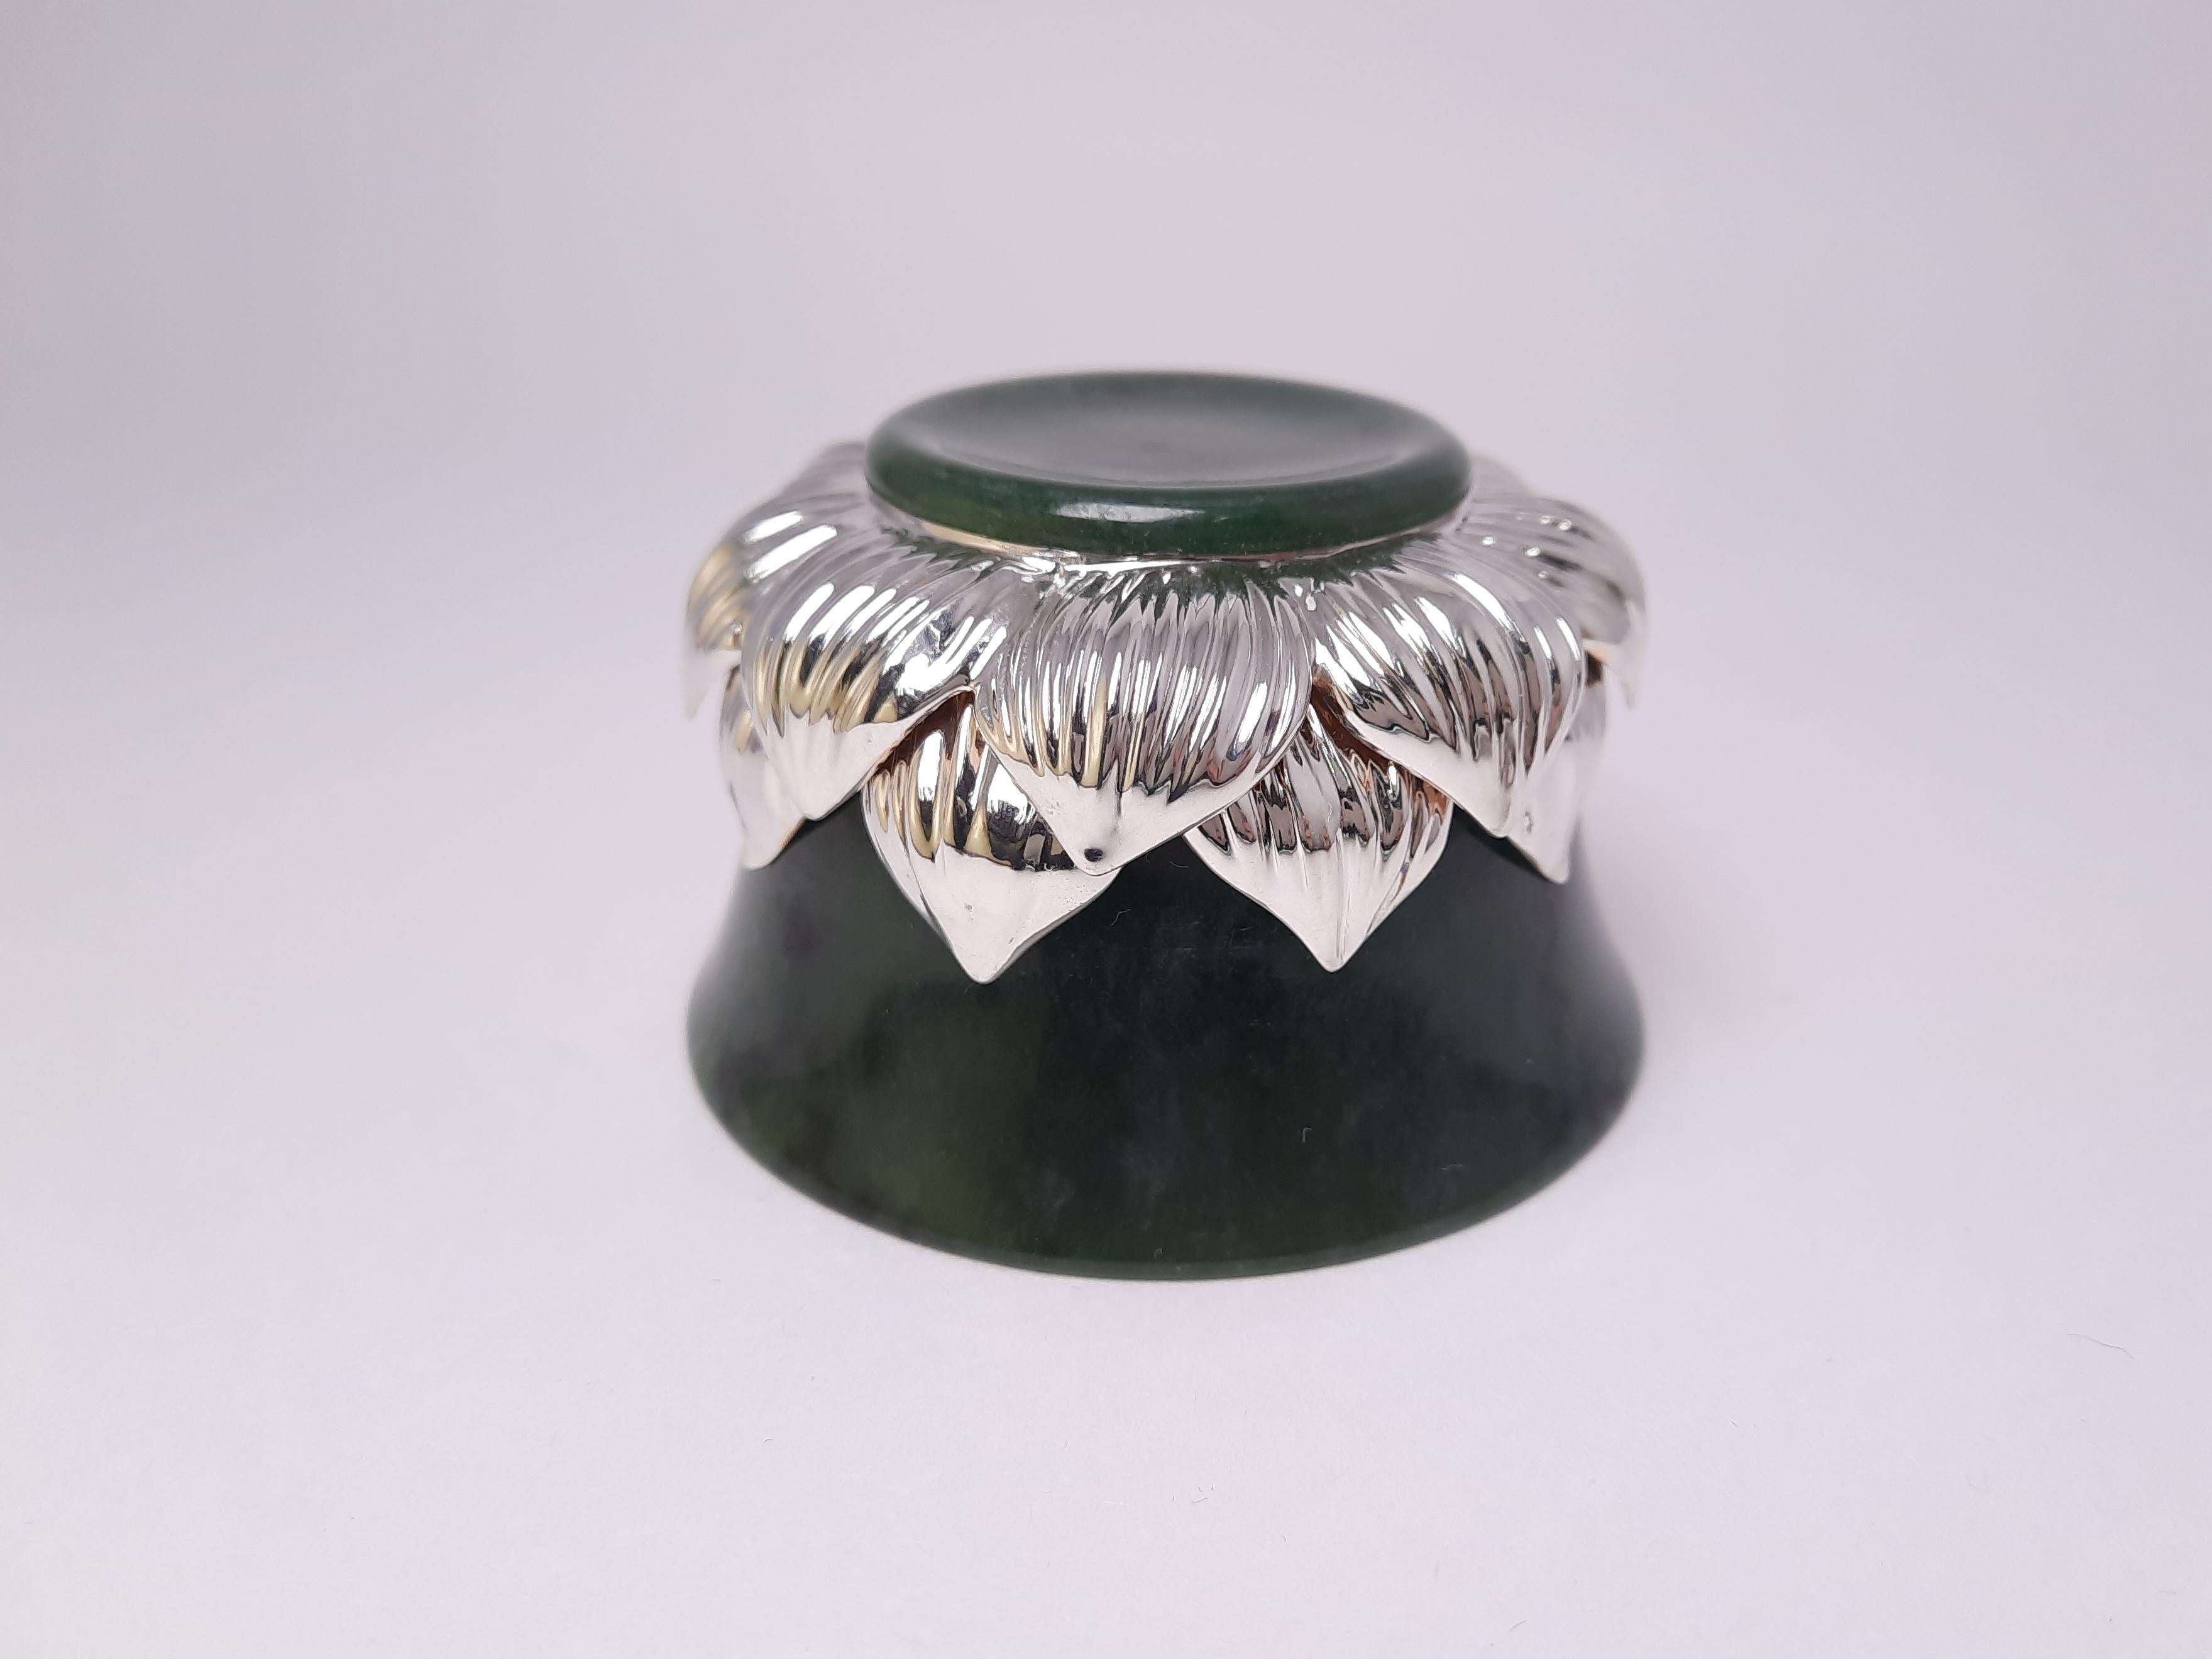 MOISEIKIN's exquisite LOTUS tea set made with genuine silver and gem quality Ural nephrite, a spiritual and energy stone. Genuine nephrite is rich in minerals and trace elements, has a caring effect on the skin, and relieves stress. The texture is